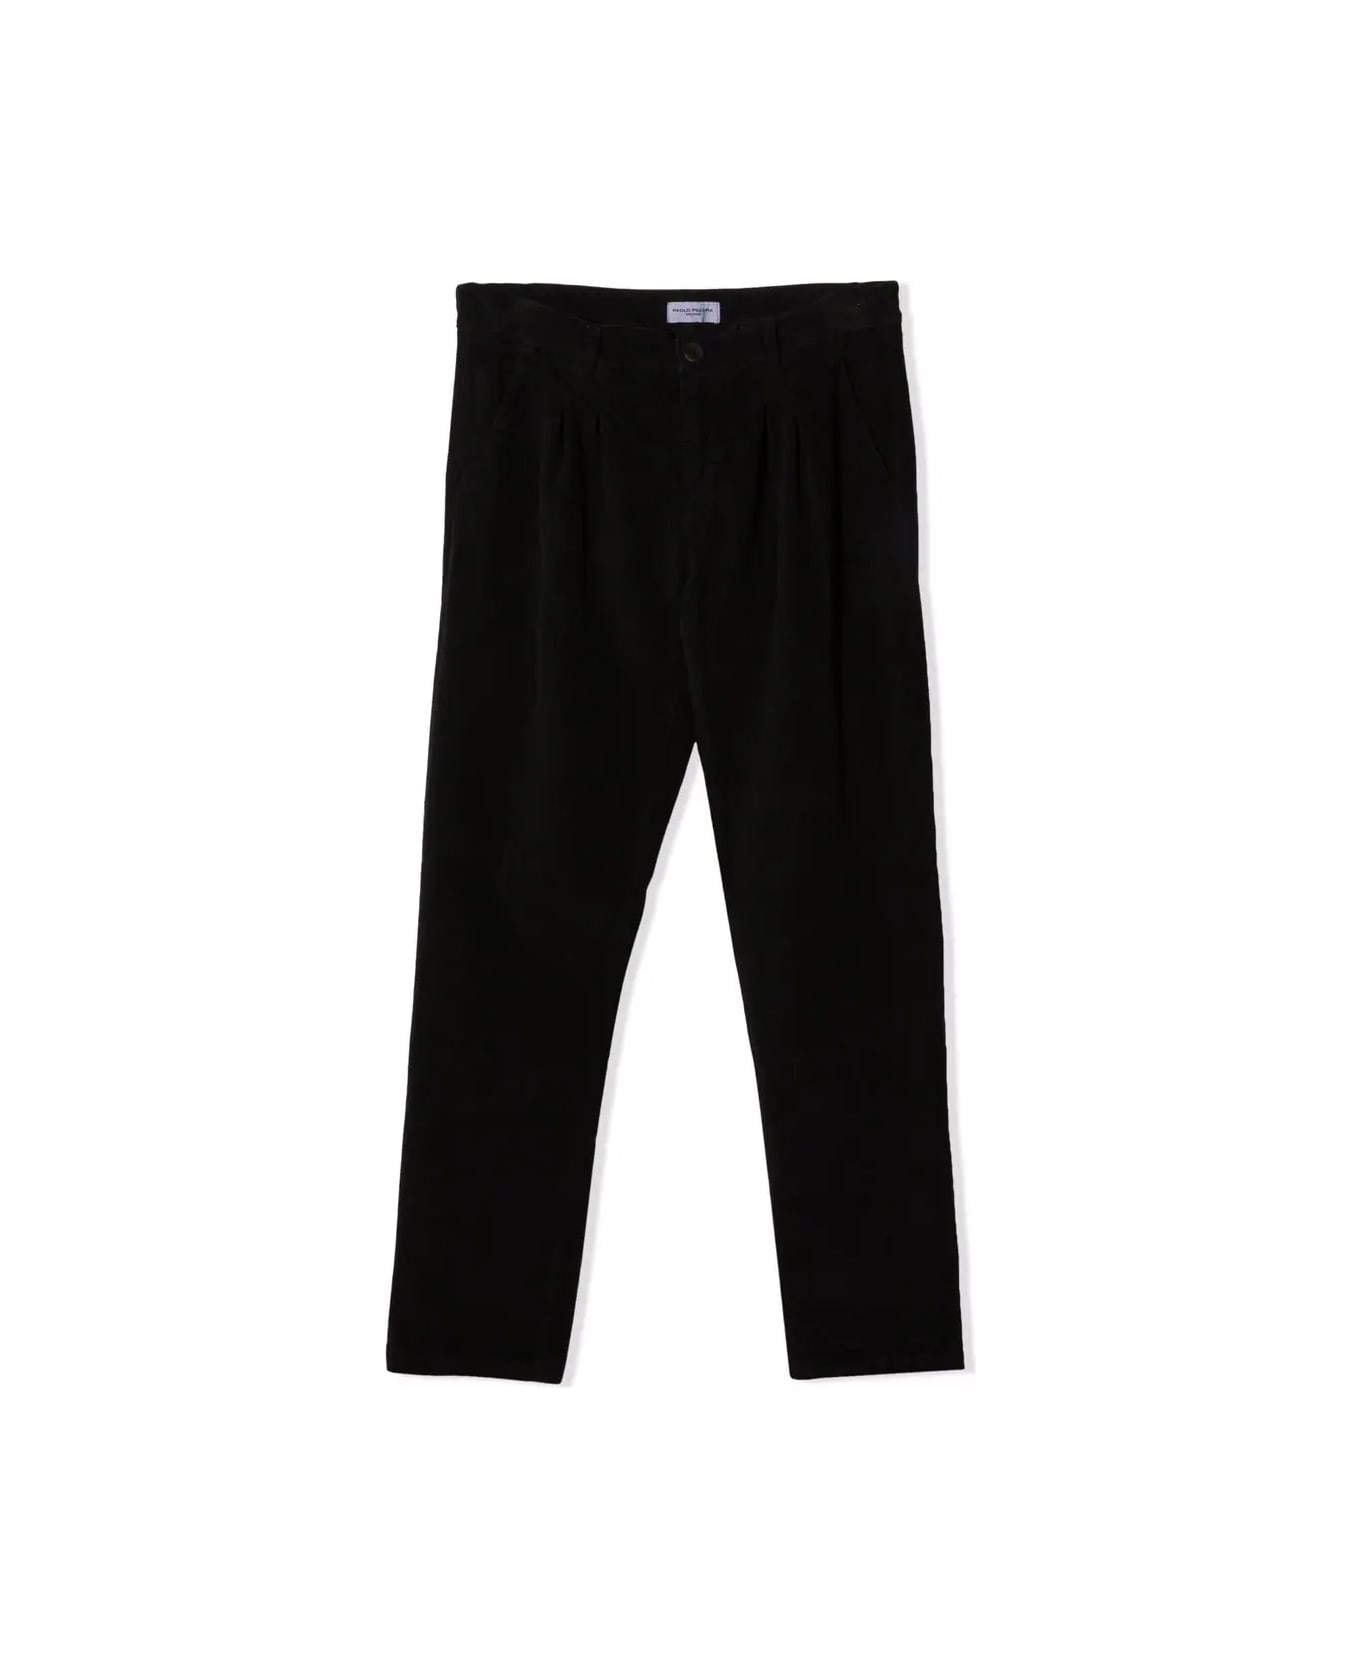 Paolo Pecora Chino With Folds - Black ボトムス